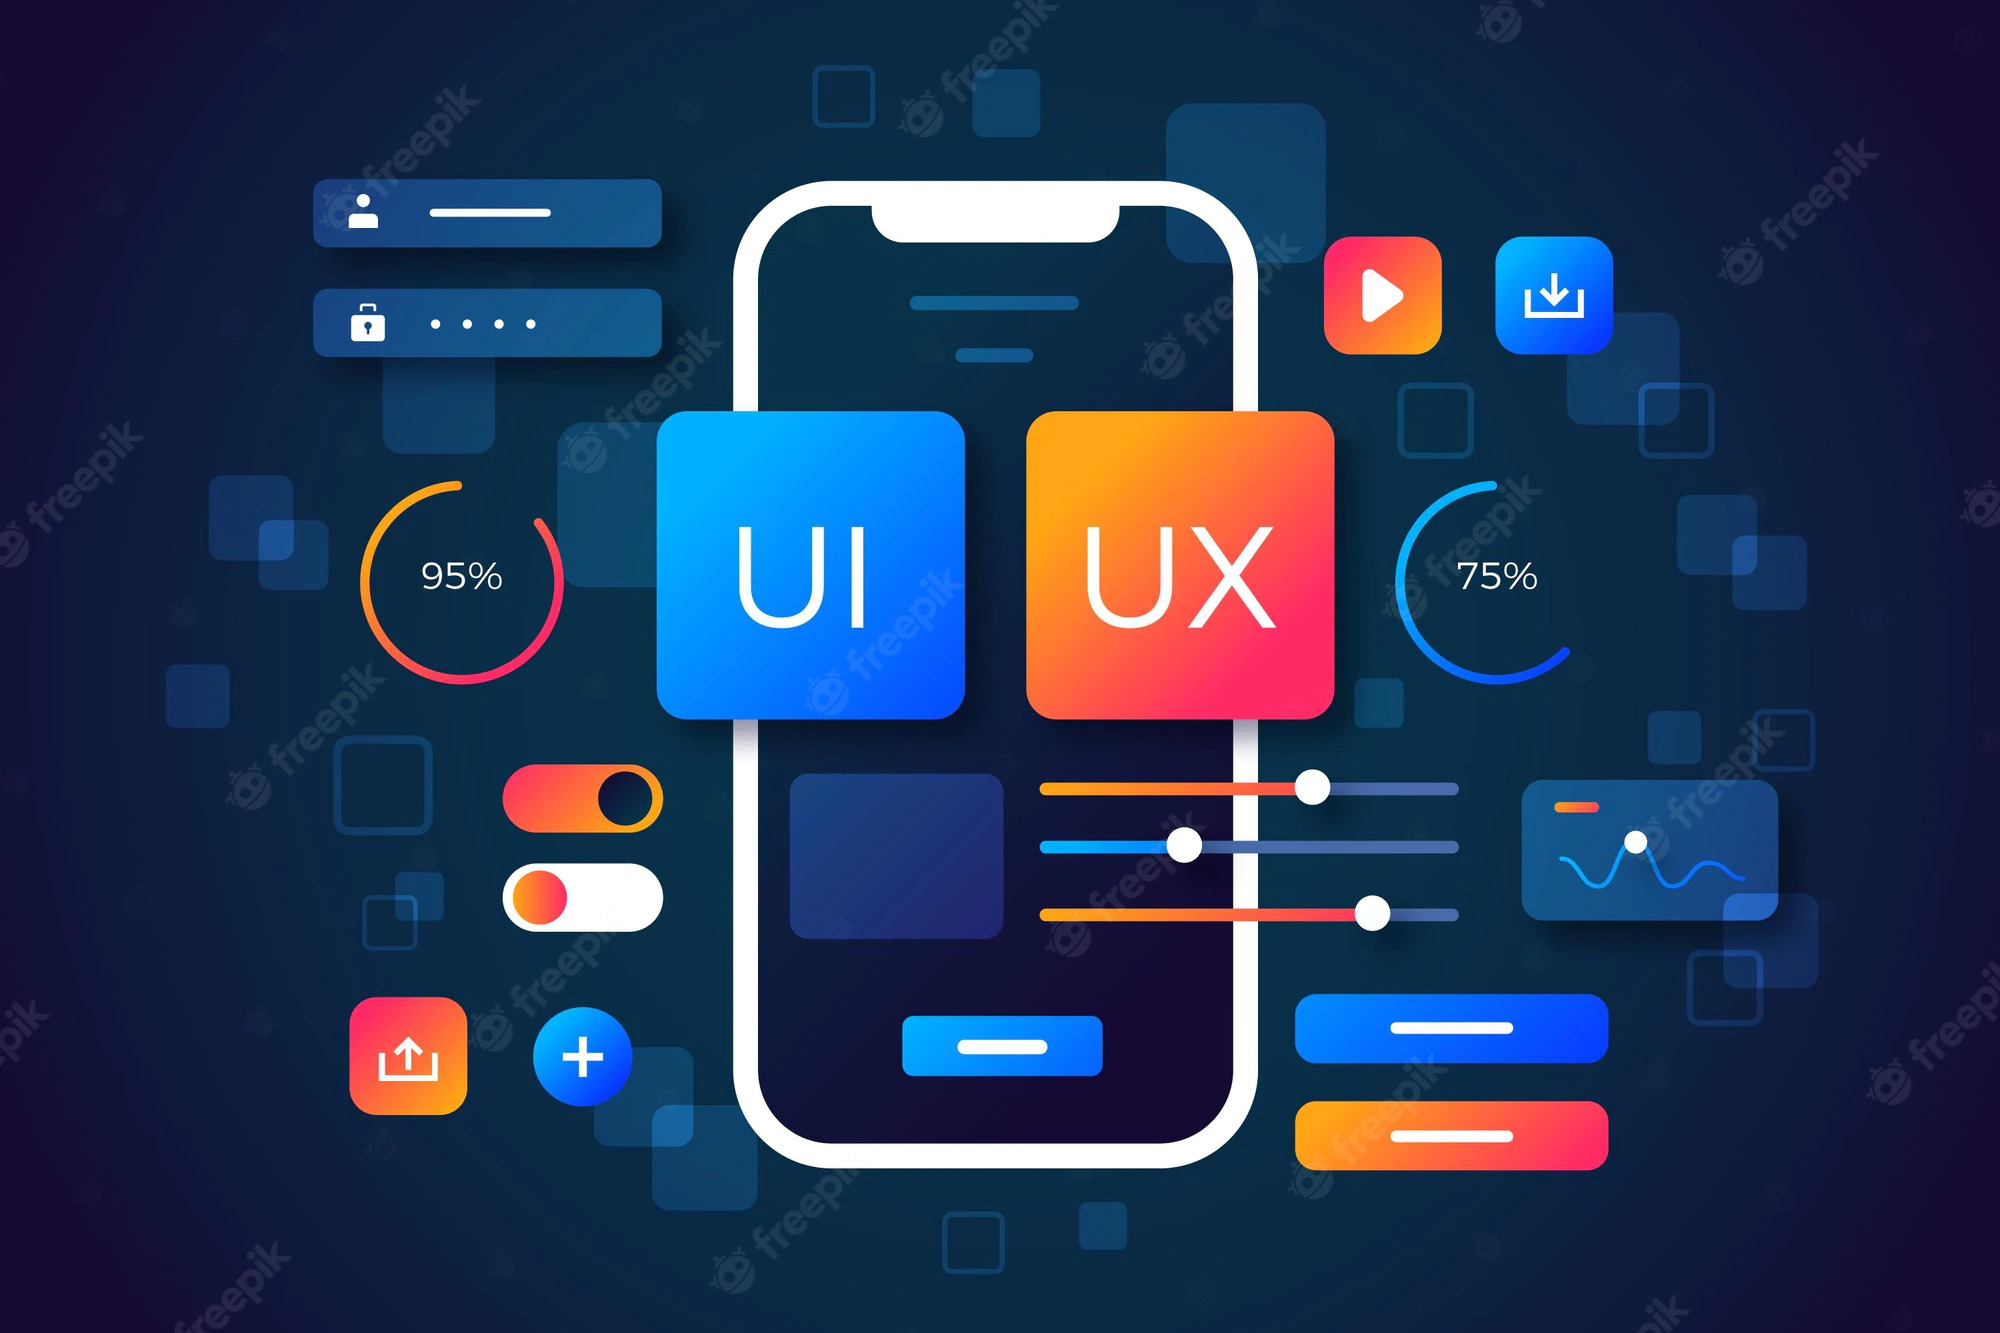 What are the top benefits of a UI UX design company?